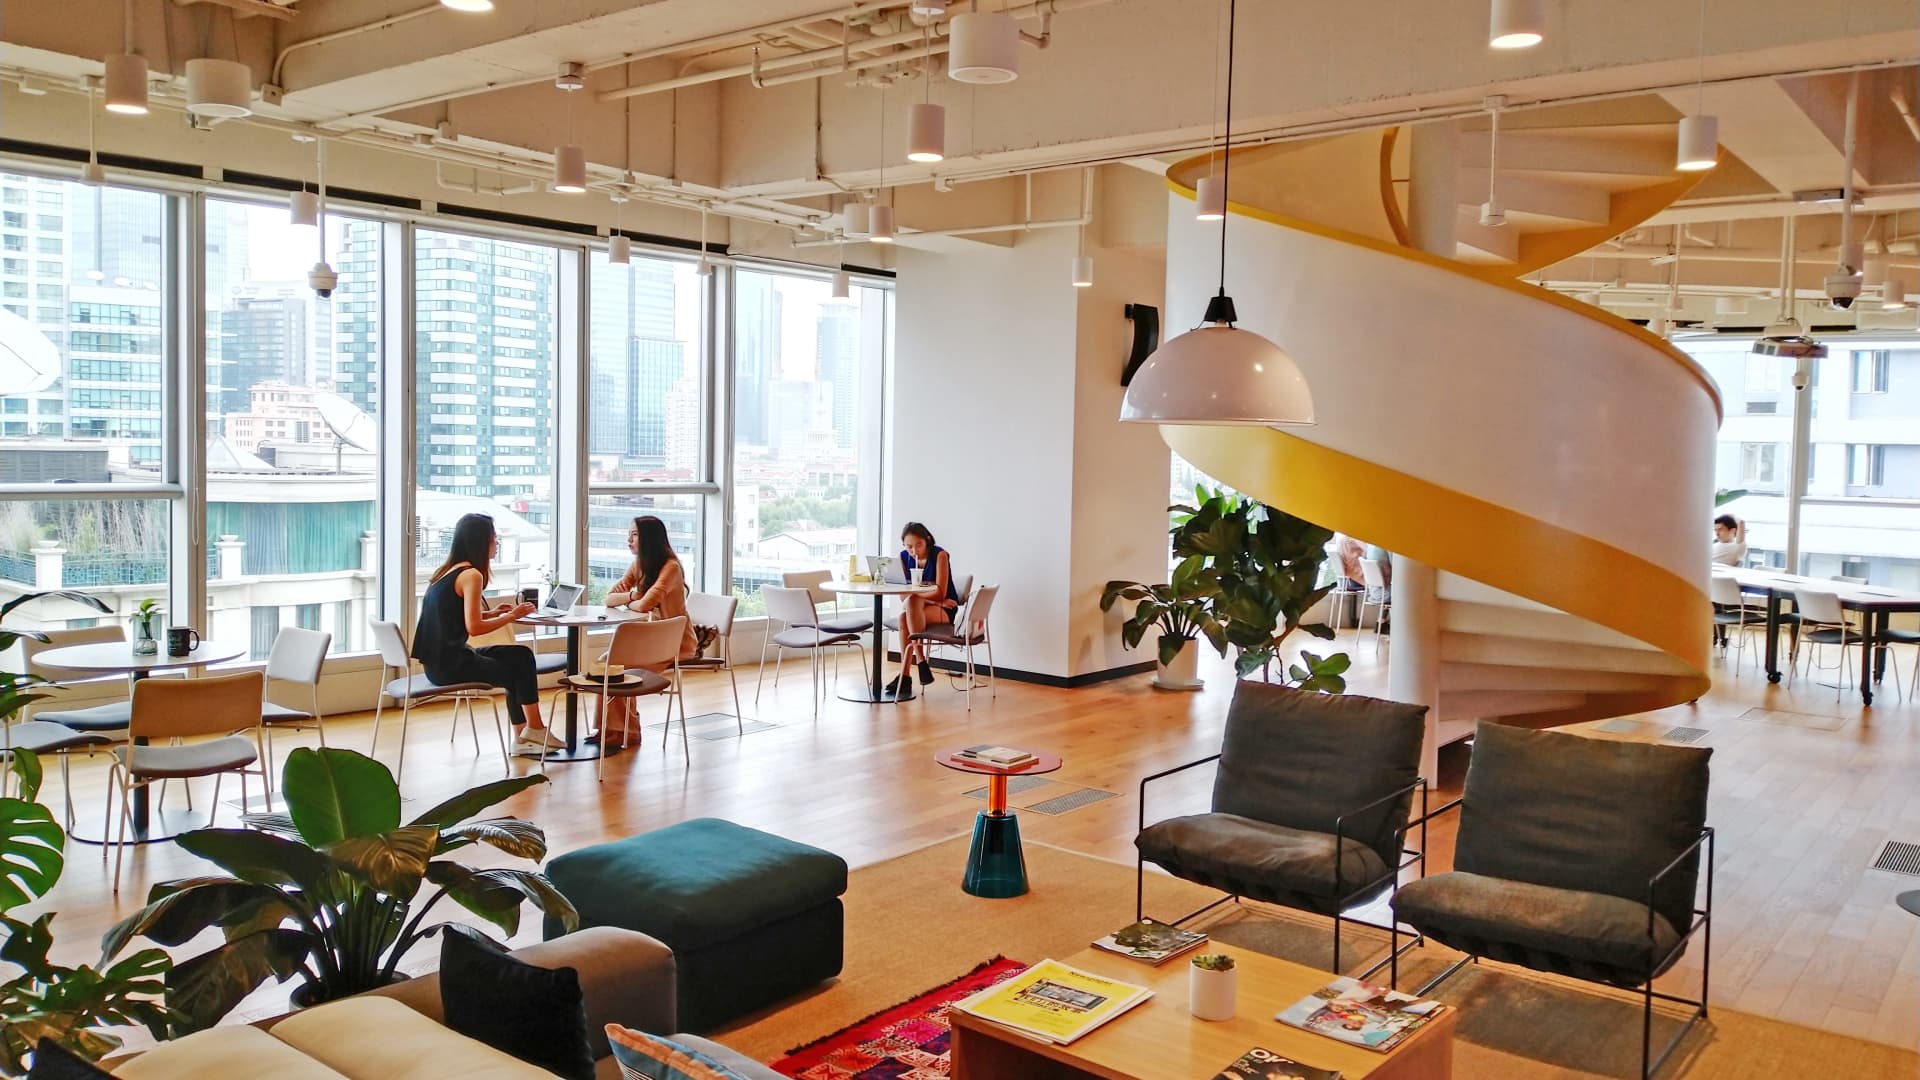 Inflation and hybrid work 'skyrocketed' demand for flexible workspace, WeWork says